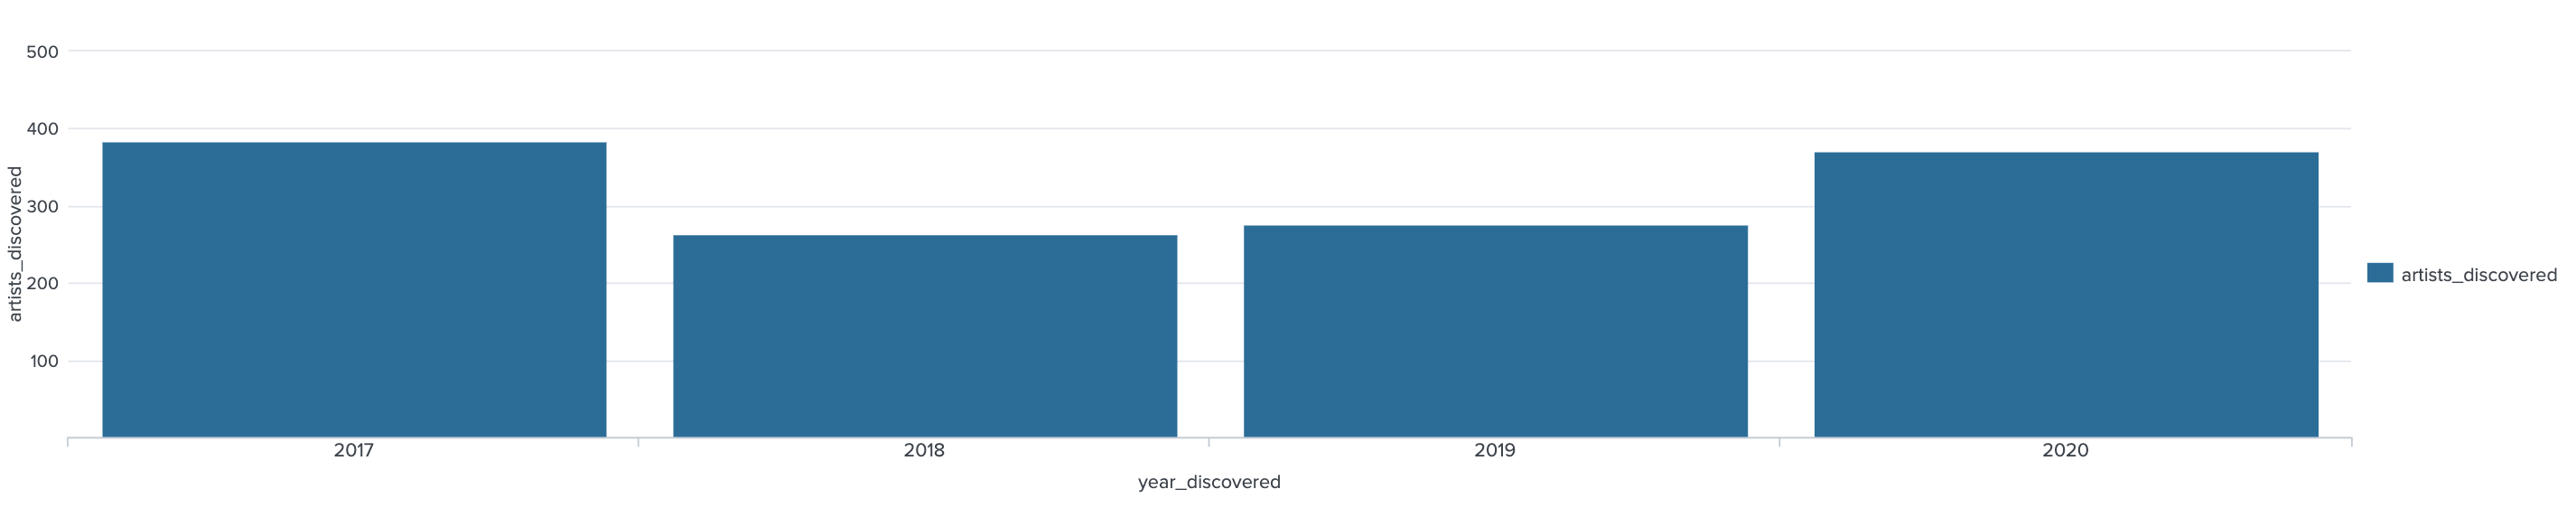 Chart depicts 260ish artists discovered in March, April, and May of 2018, 280 discovered in 2019, and 360 discovered in 2020. Second chart shows the same data but adds 2017, with 390 artists discovered